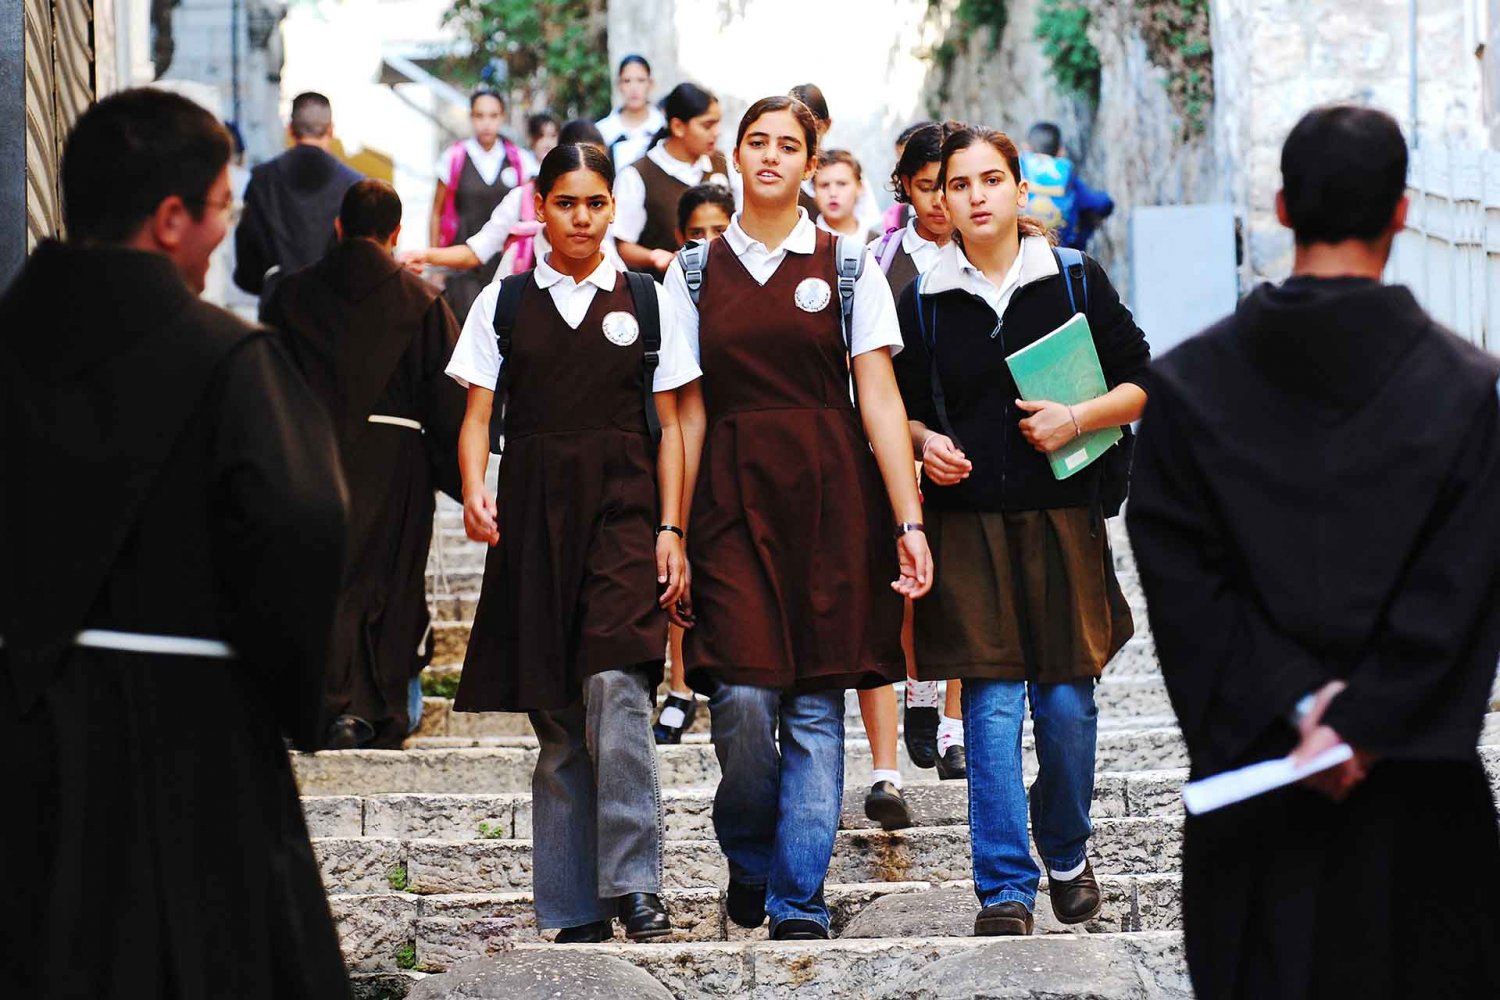 A group of girls on their way to school in the Muslim Quarter of the Old City in East Jerusalem, September 8, 2007.